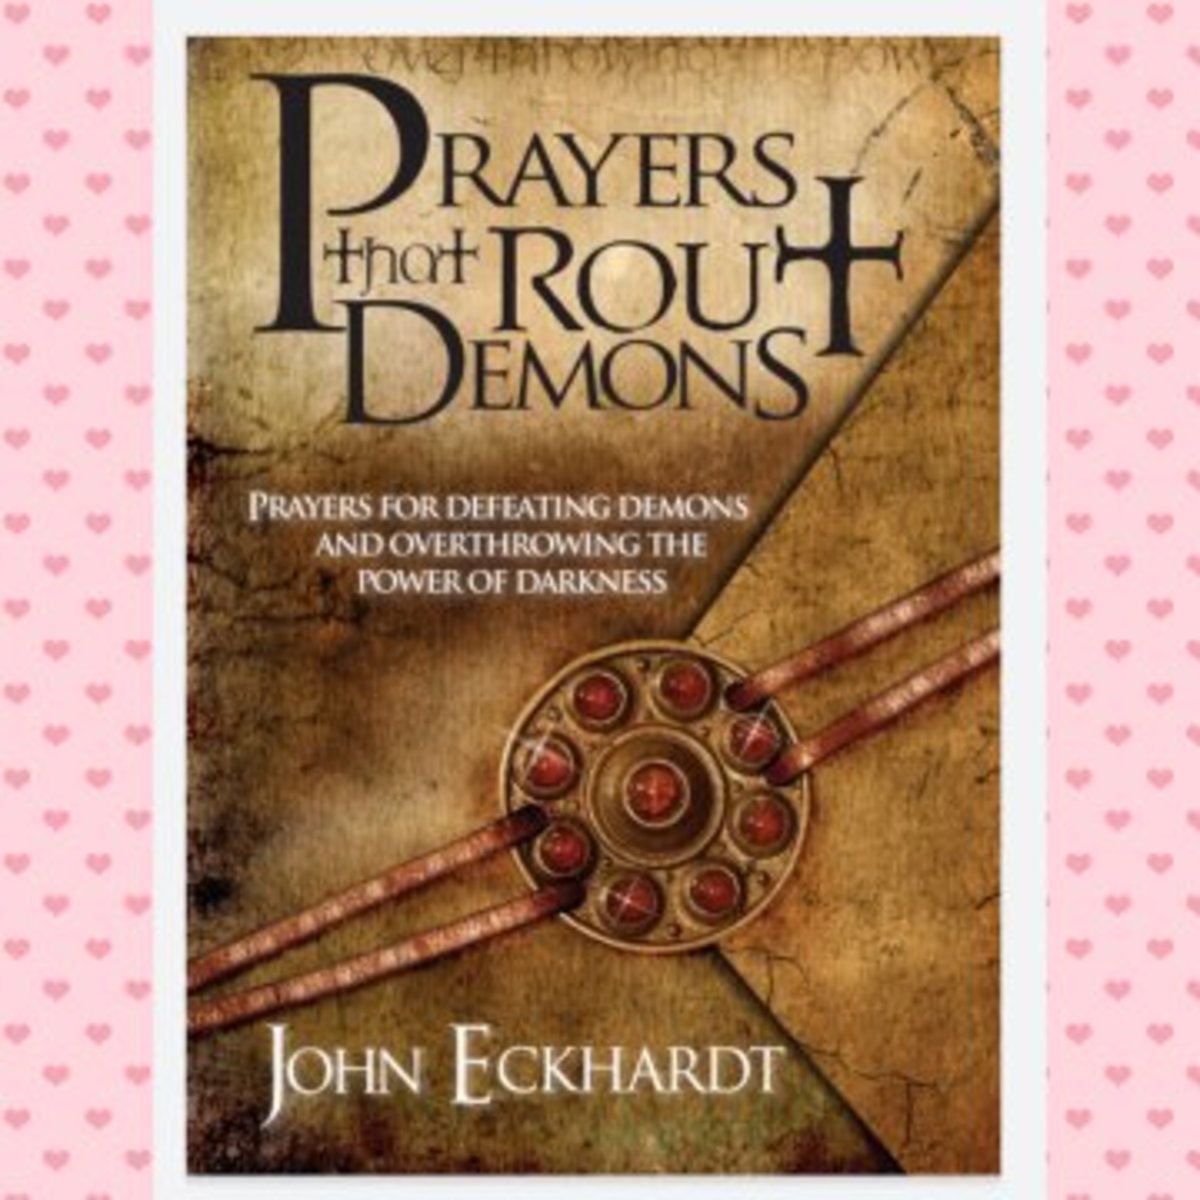 Prayers That Rout Demons by John Eckhardt #3 Book Review